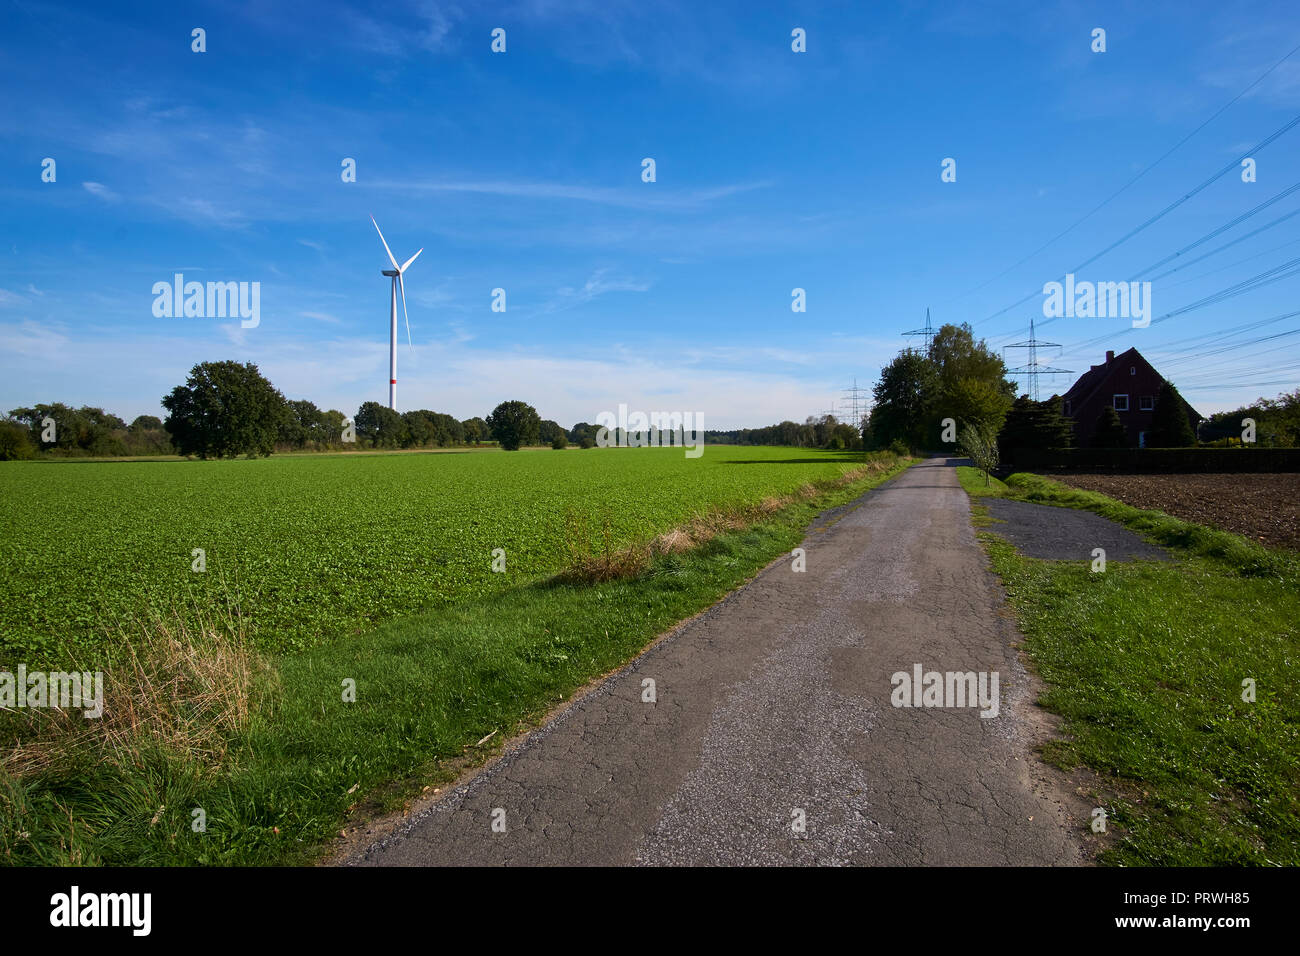 a windmill in a landscape picture and power poles Stock Photo